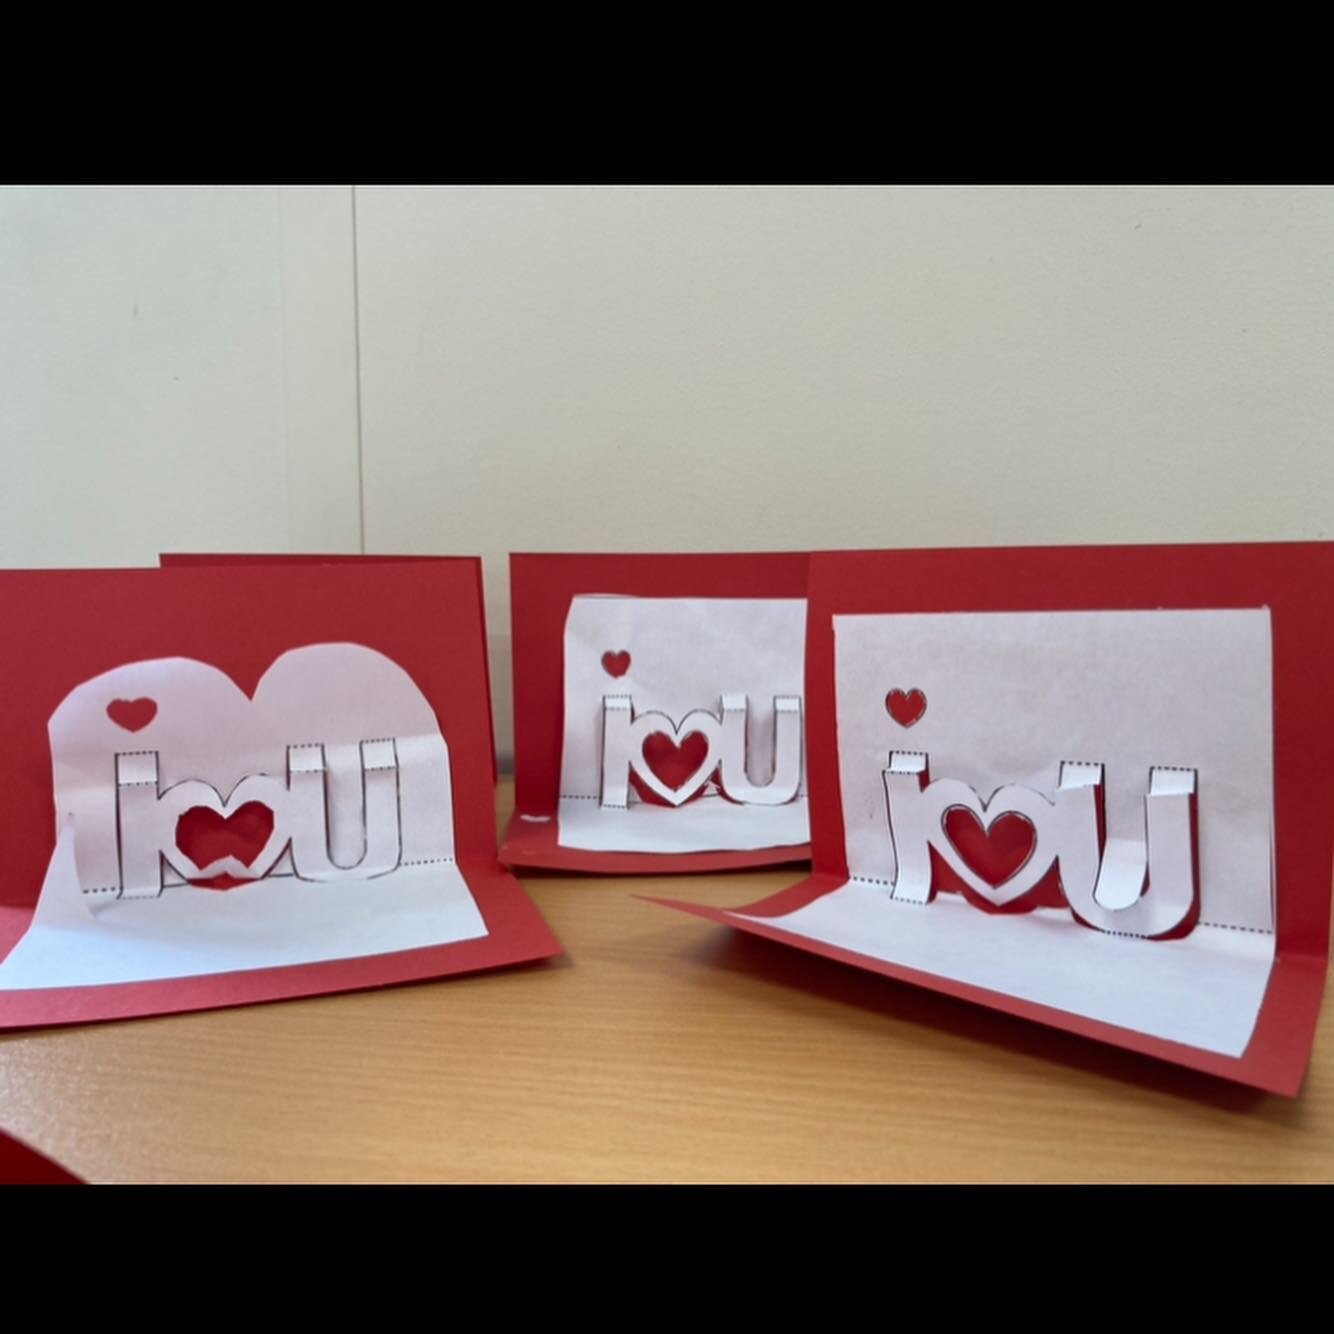 L&aacute; Fh&eacute;ile Vailint&iacute;n

Our second year art class are spreading some positivity and love today with some pop up card craft.

#goatstownetss #educatetogether #etss #gr&aacute;